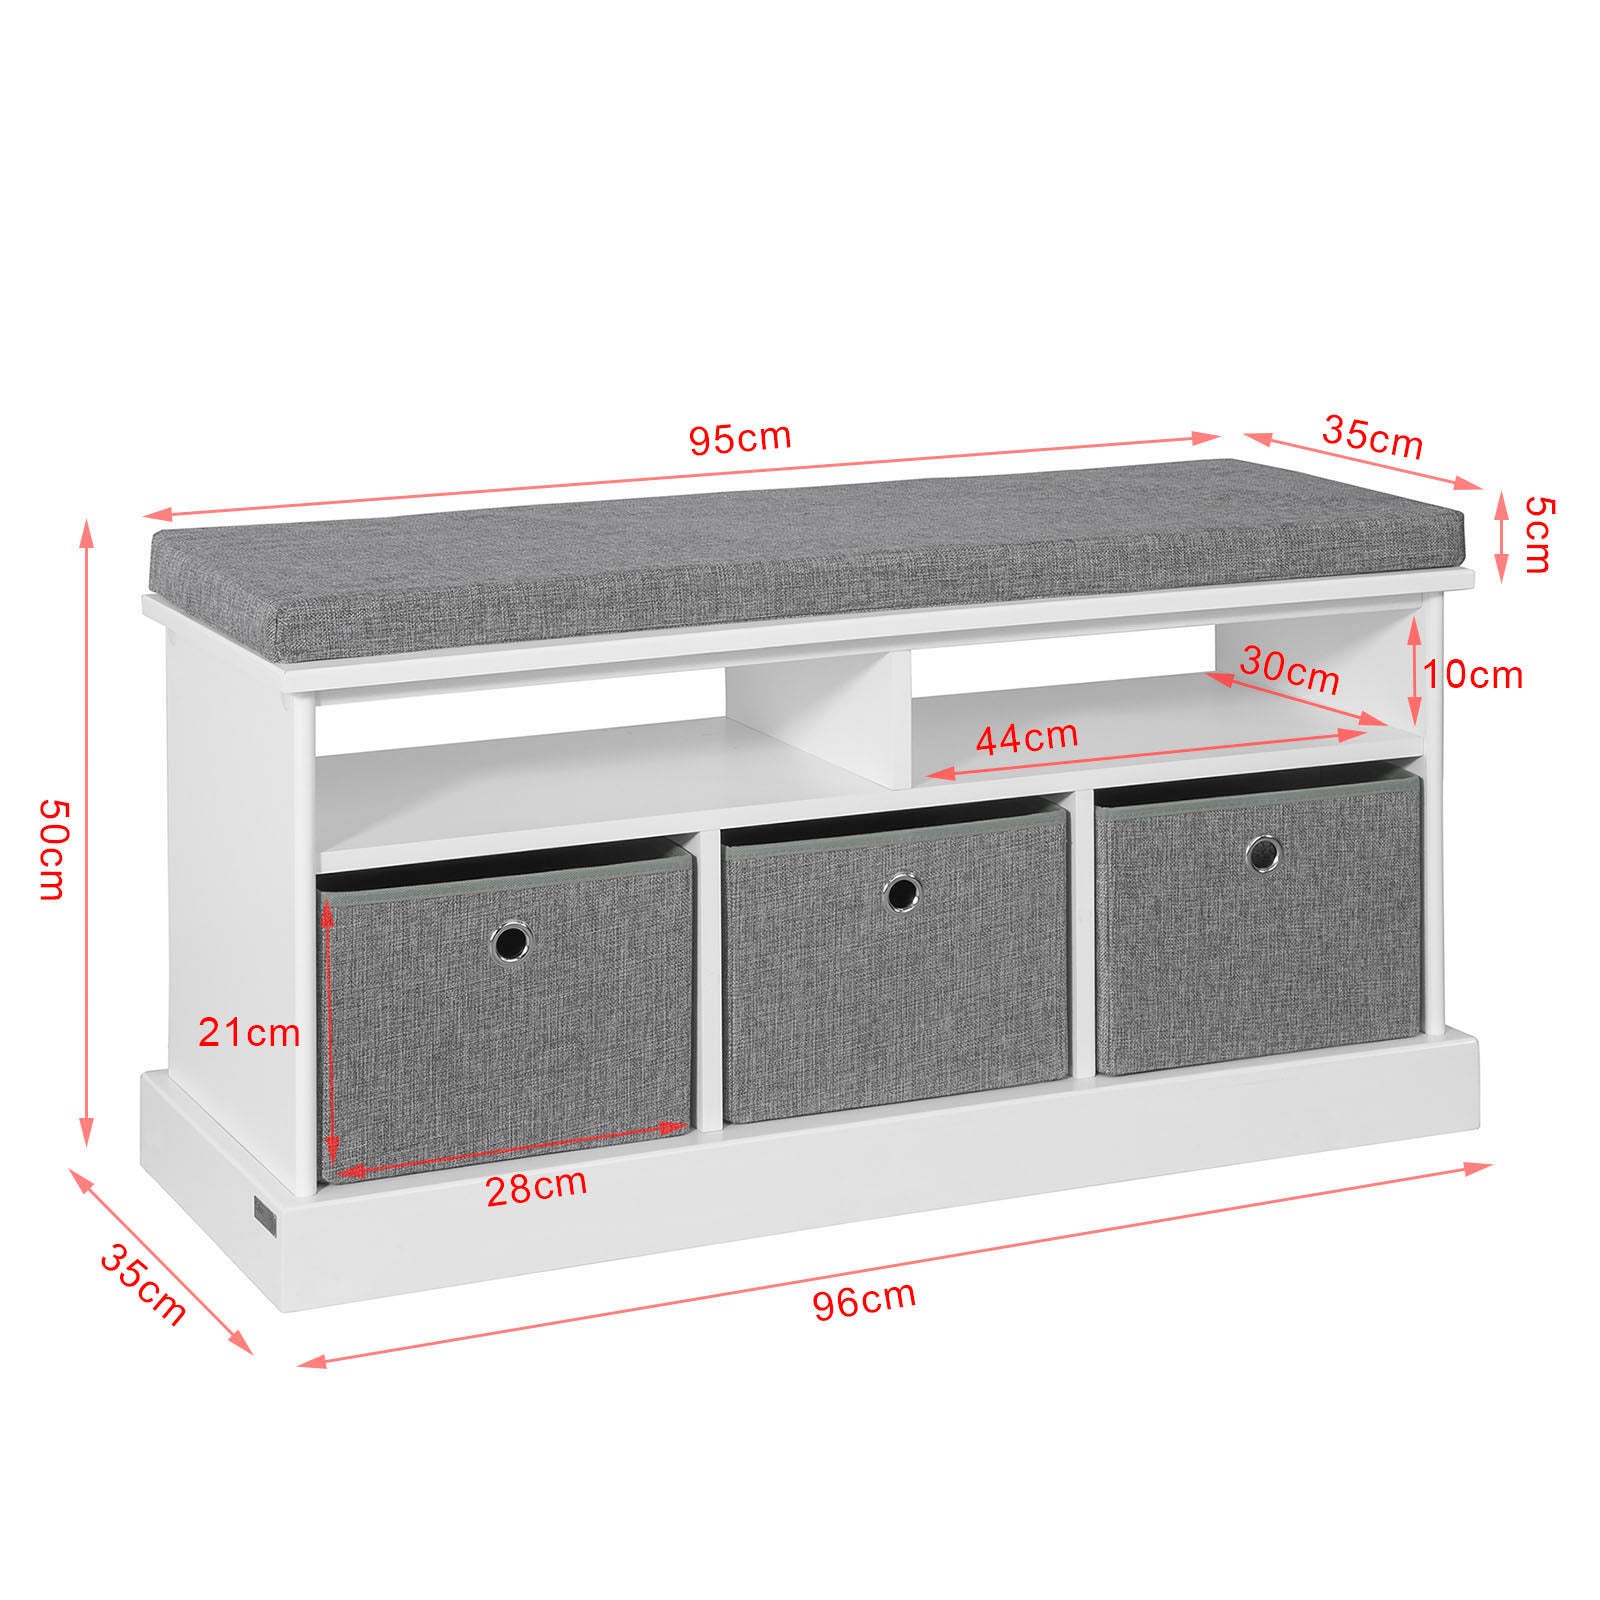 SoBuy FSR67-HG,Storage Bench with 3 Fabric Drawers and Seat Cushion,Hallway Shoe Bench,Shoe Cabinet